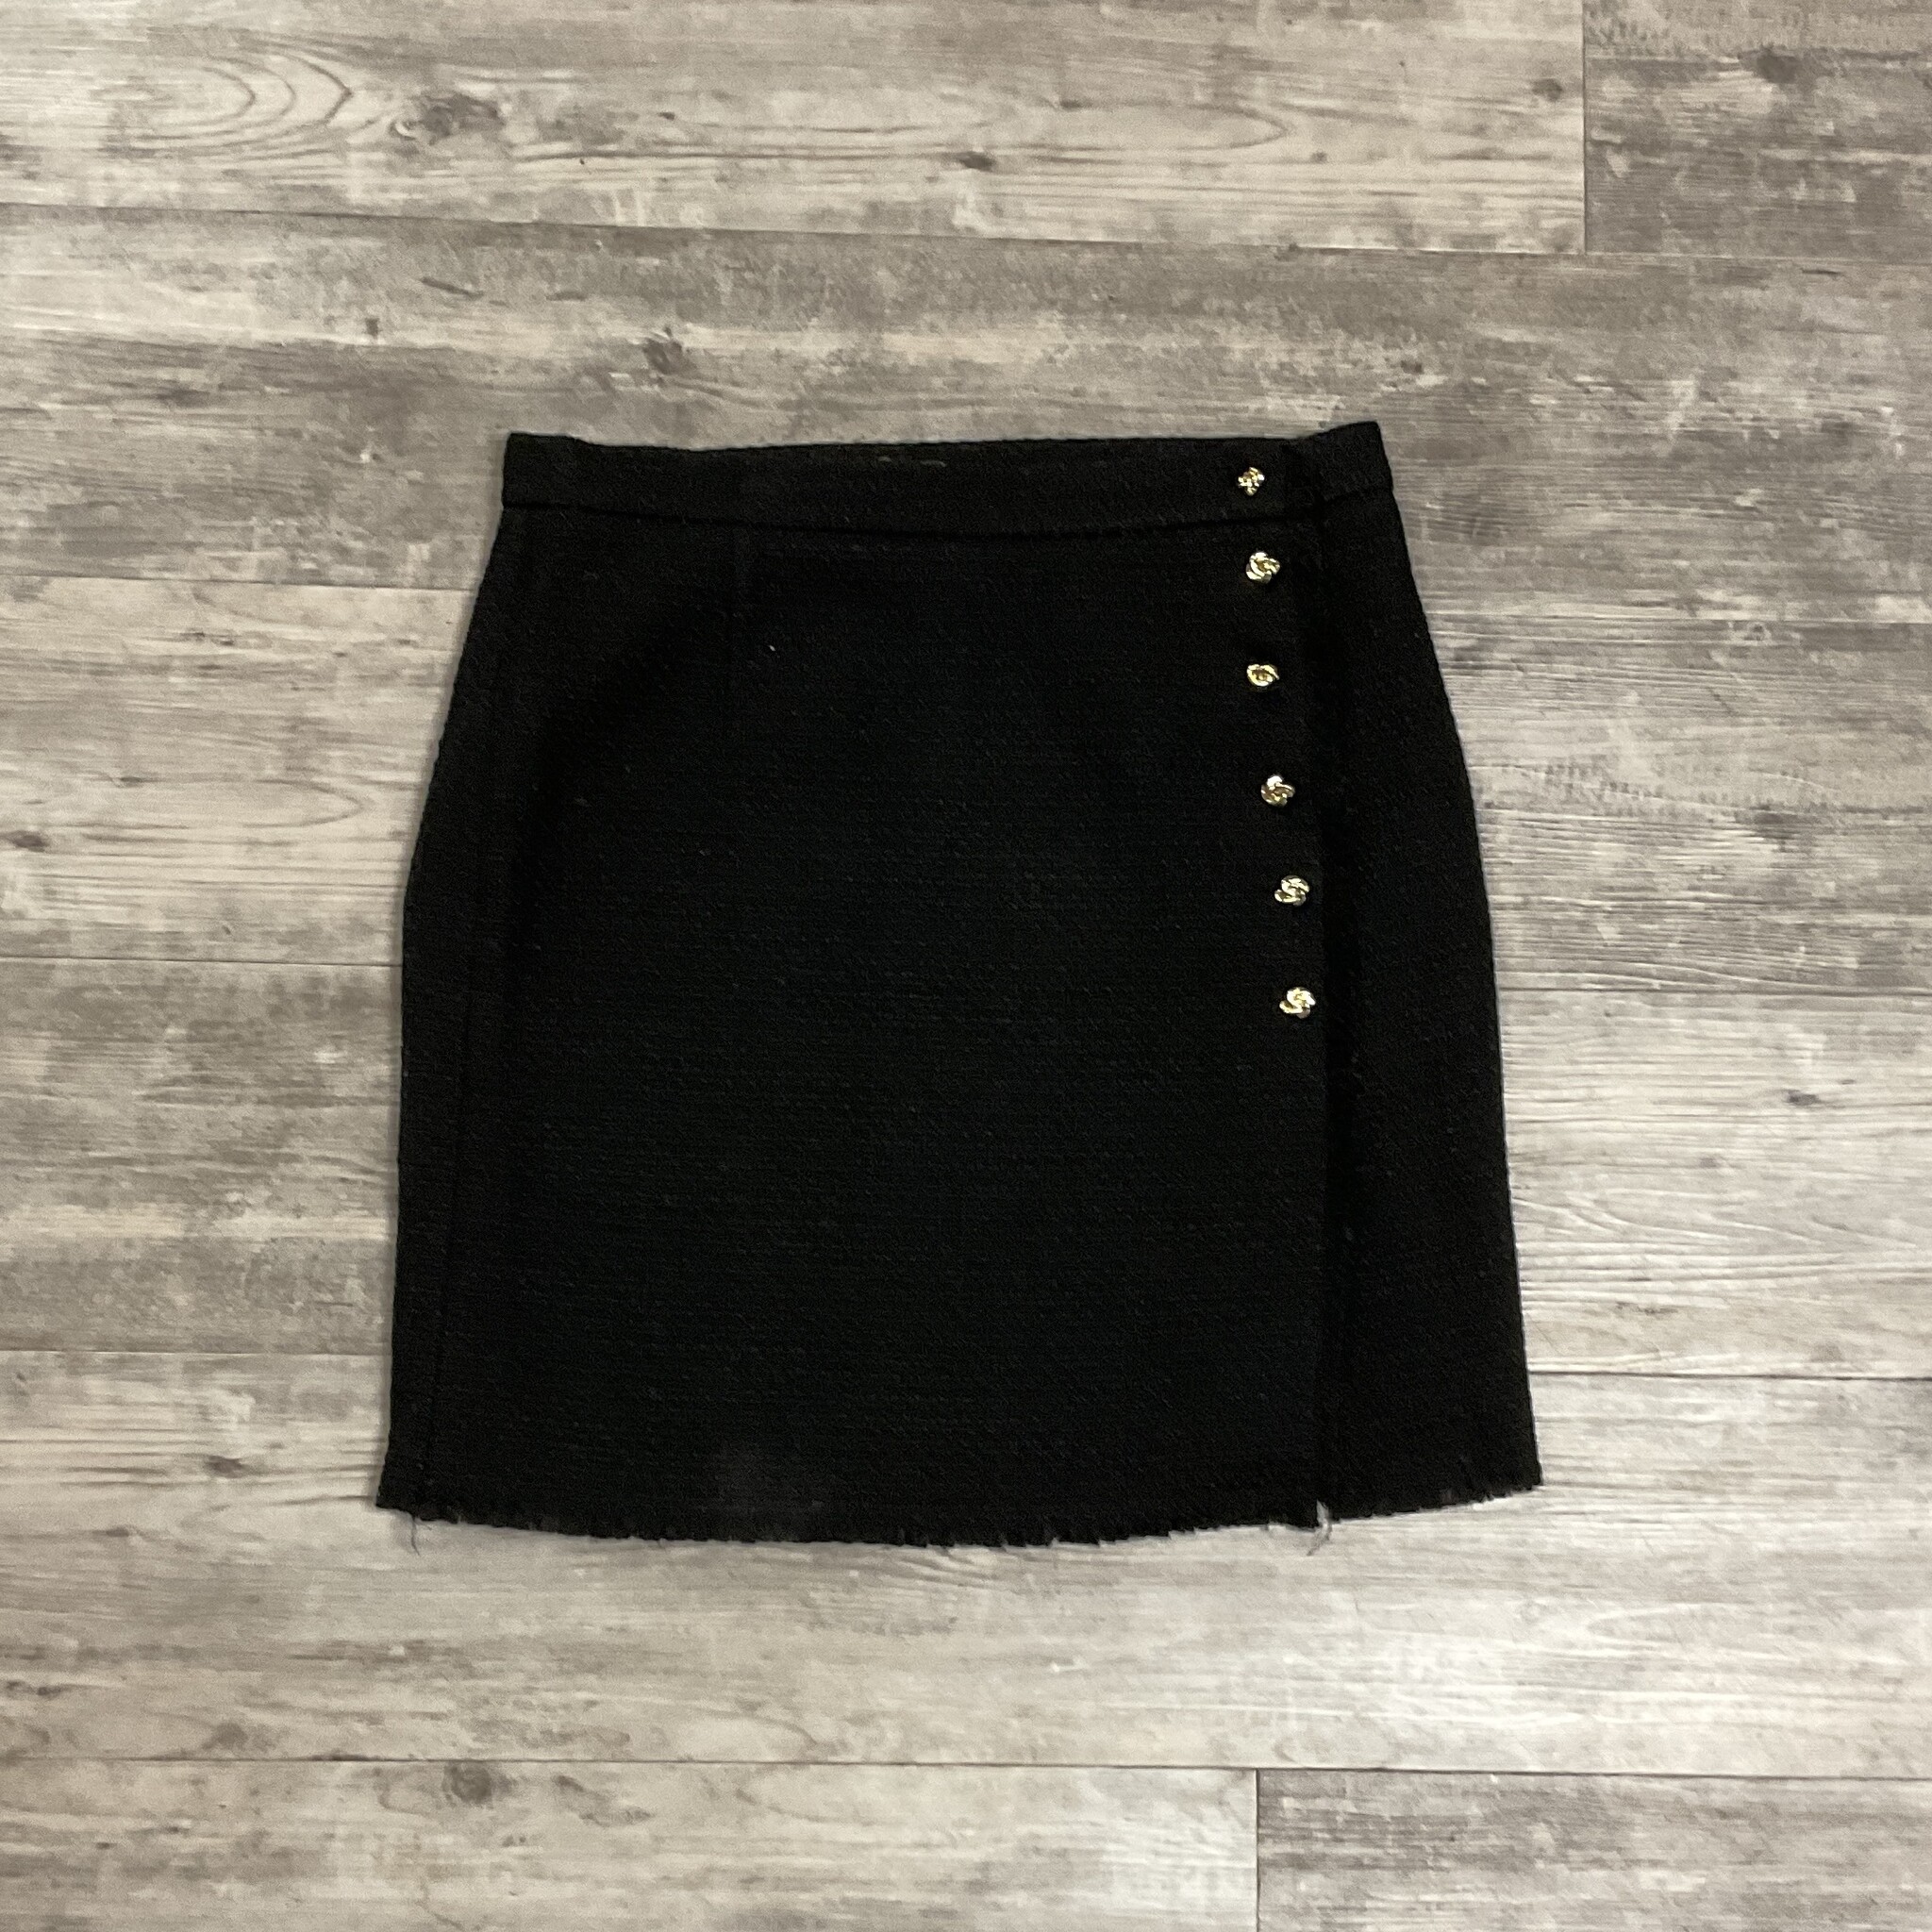 Black Skirt with Raw Hem and Gold Accents - Size 48